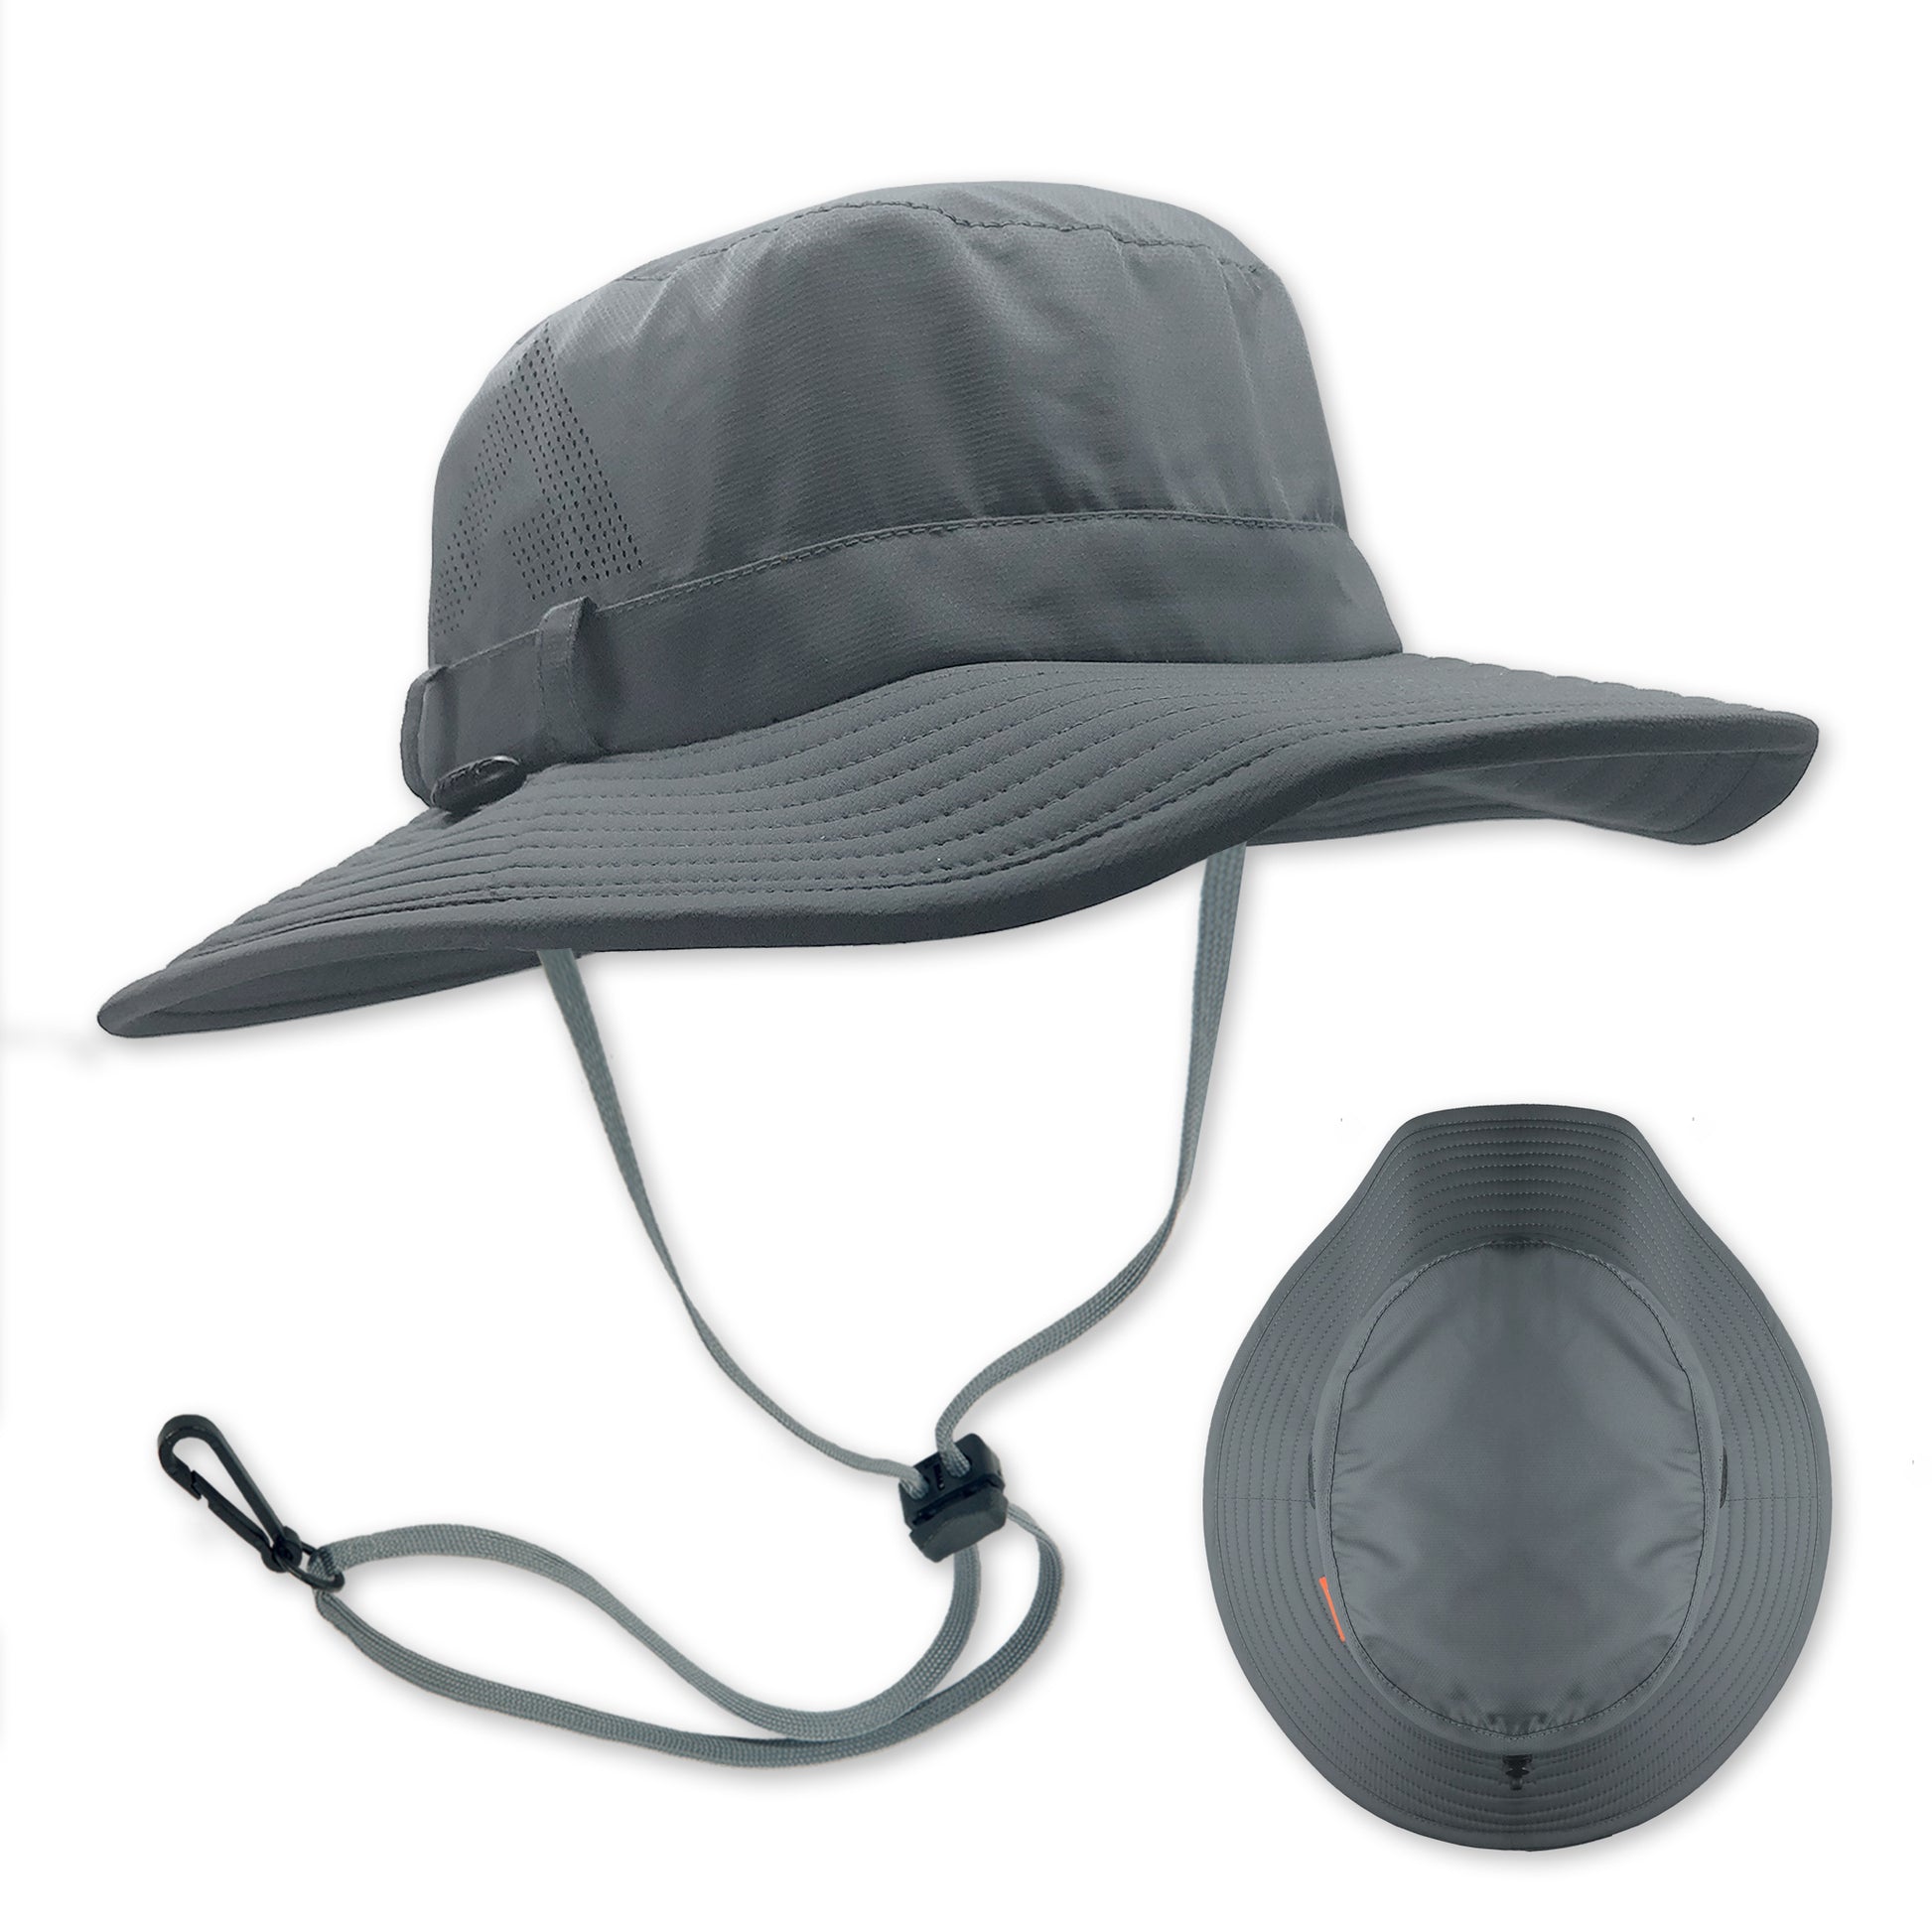 13 FISHING Men's One Size Gray Matter Curved Brim Snapback